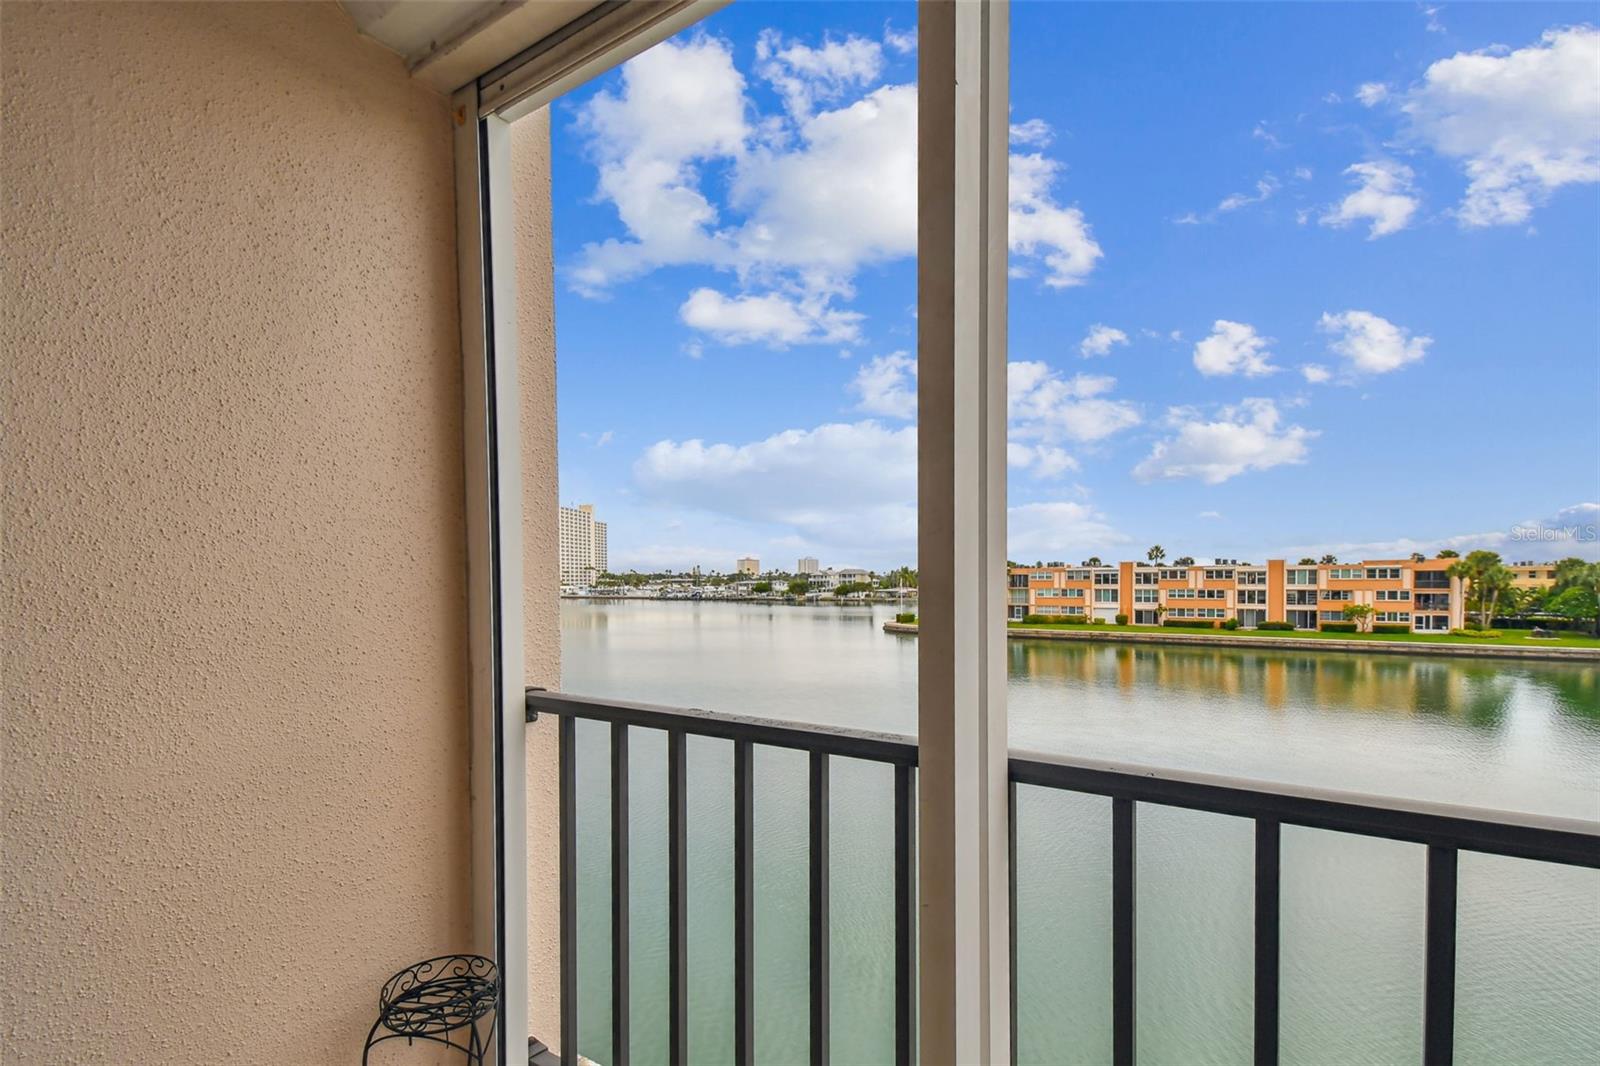 Waterfront balcony with hurricane shutters